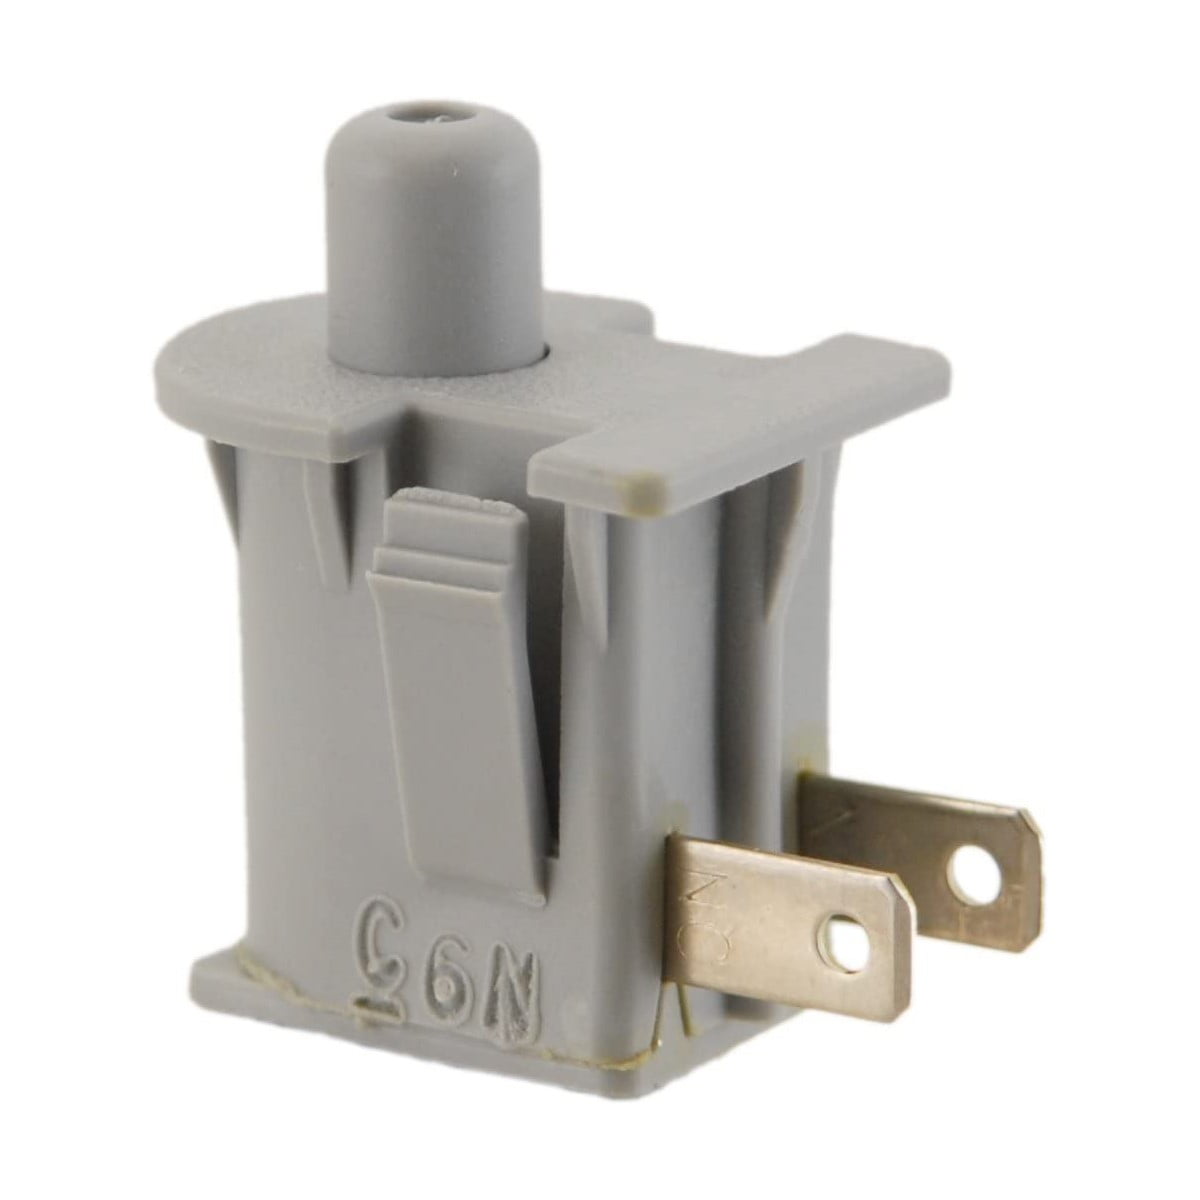 Plunger Interlock Switch Single Pole Normally Closed Multi Application Mowers 